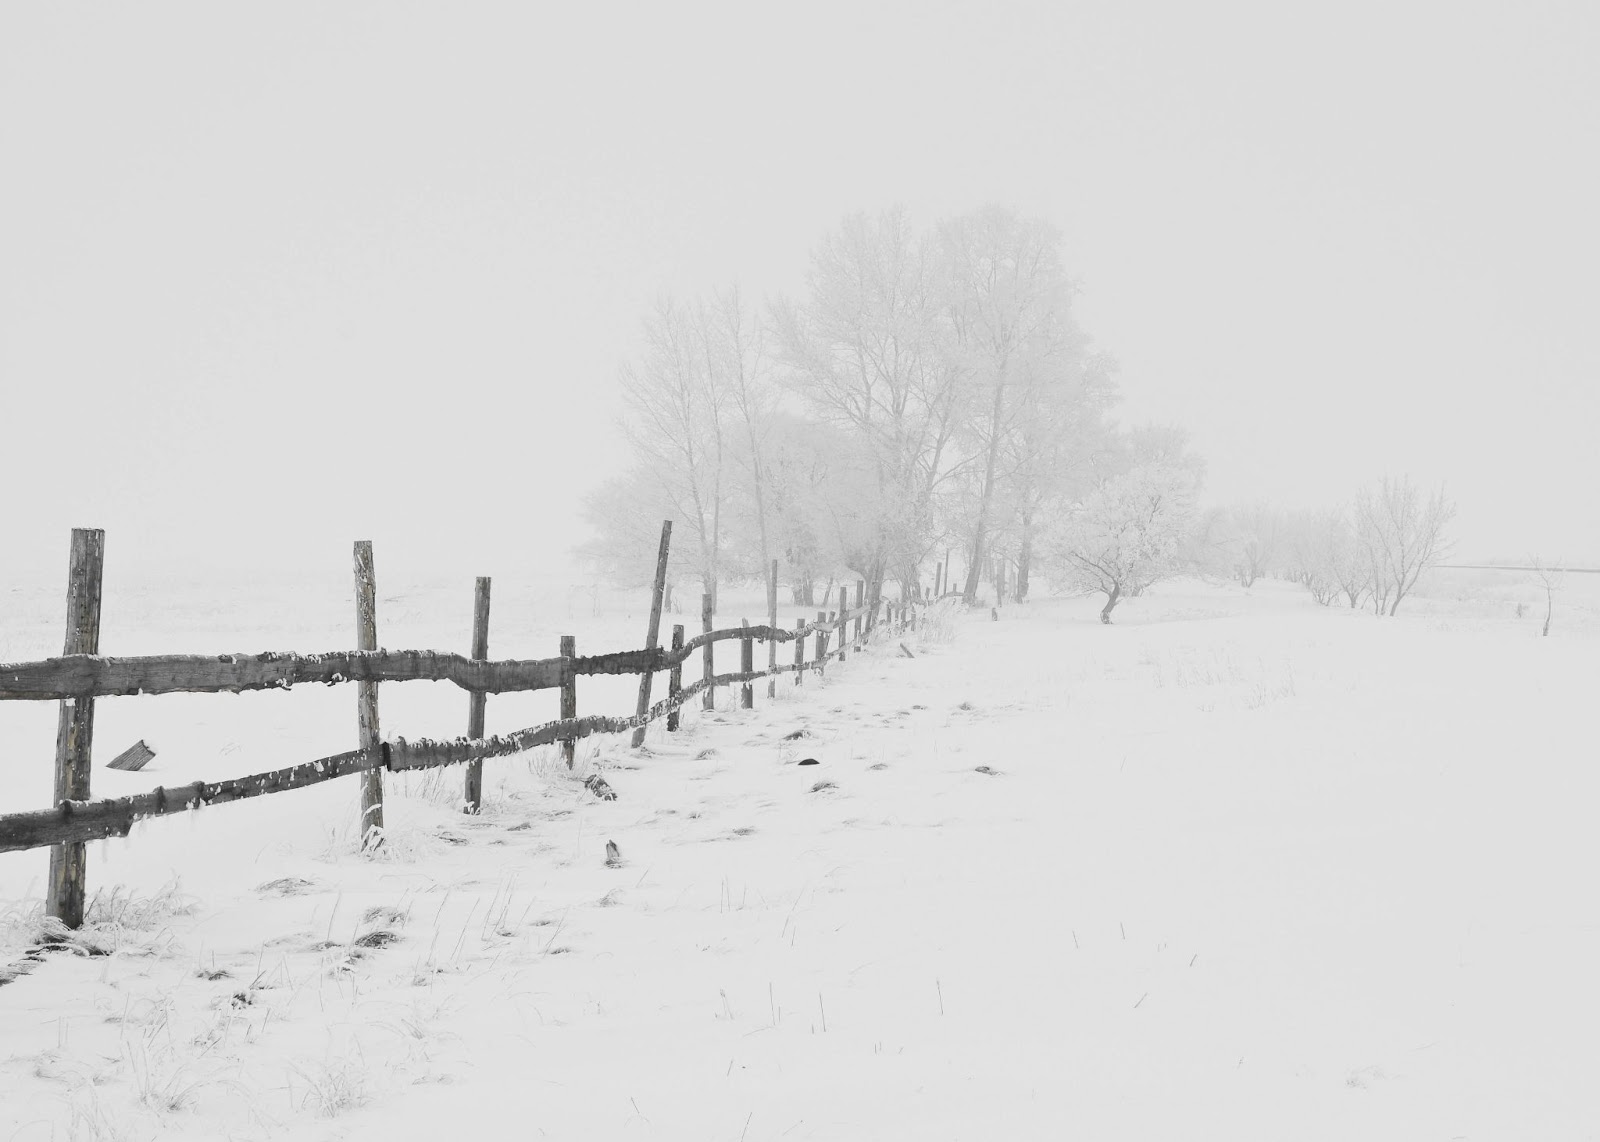 Snowy field with fence